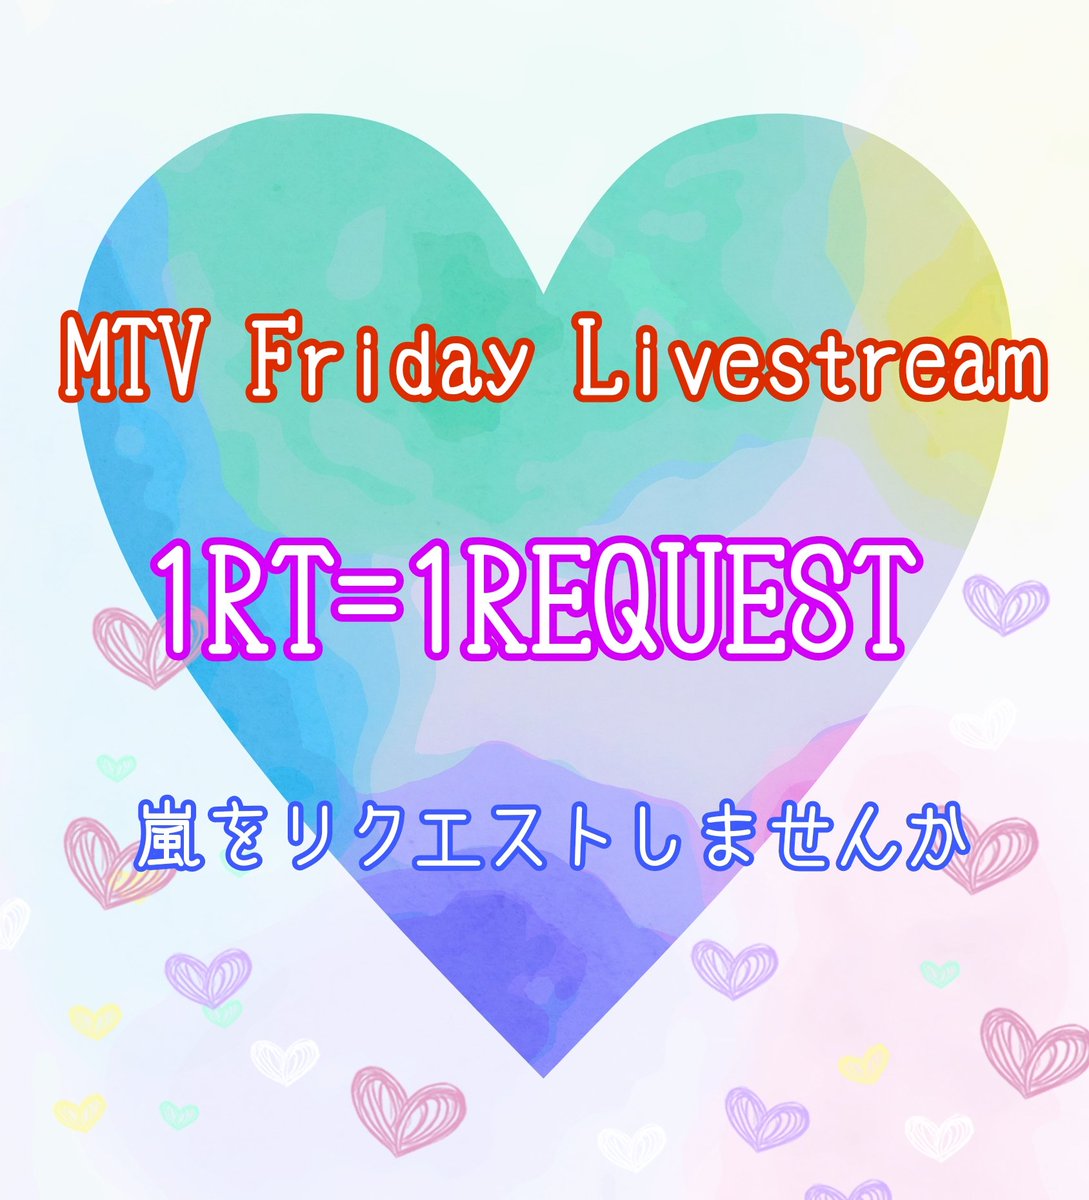 REQUEST @arashi5official @MTV #FridayLivestream 

🌸1RT=1REQUEST🌸 #嵐RTリク 

嵐の音楽が沢山の人に届きますように

Whenever You Call